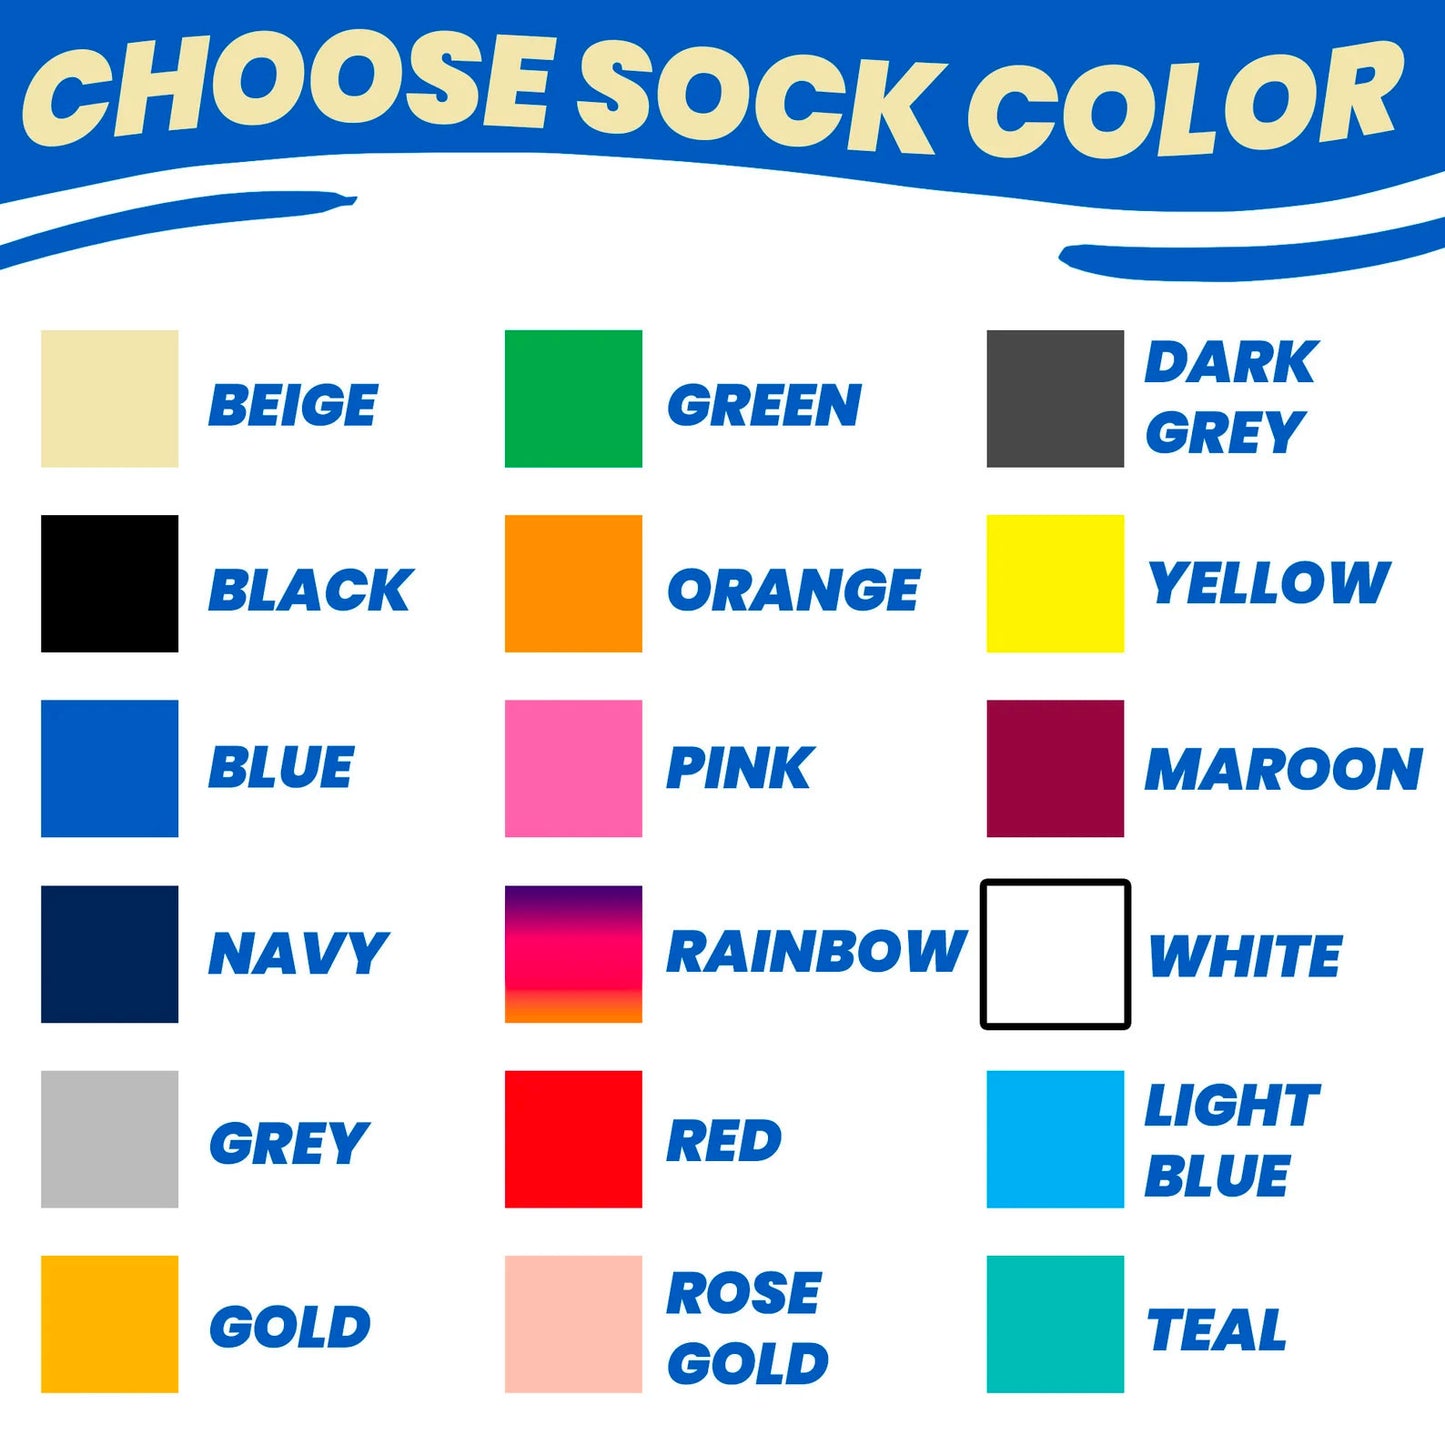 galentines day gift socks colors to choose from